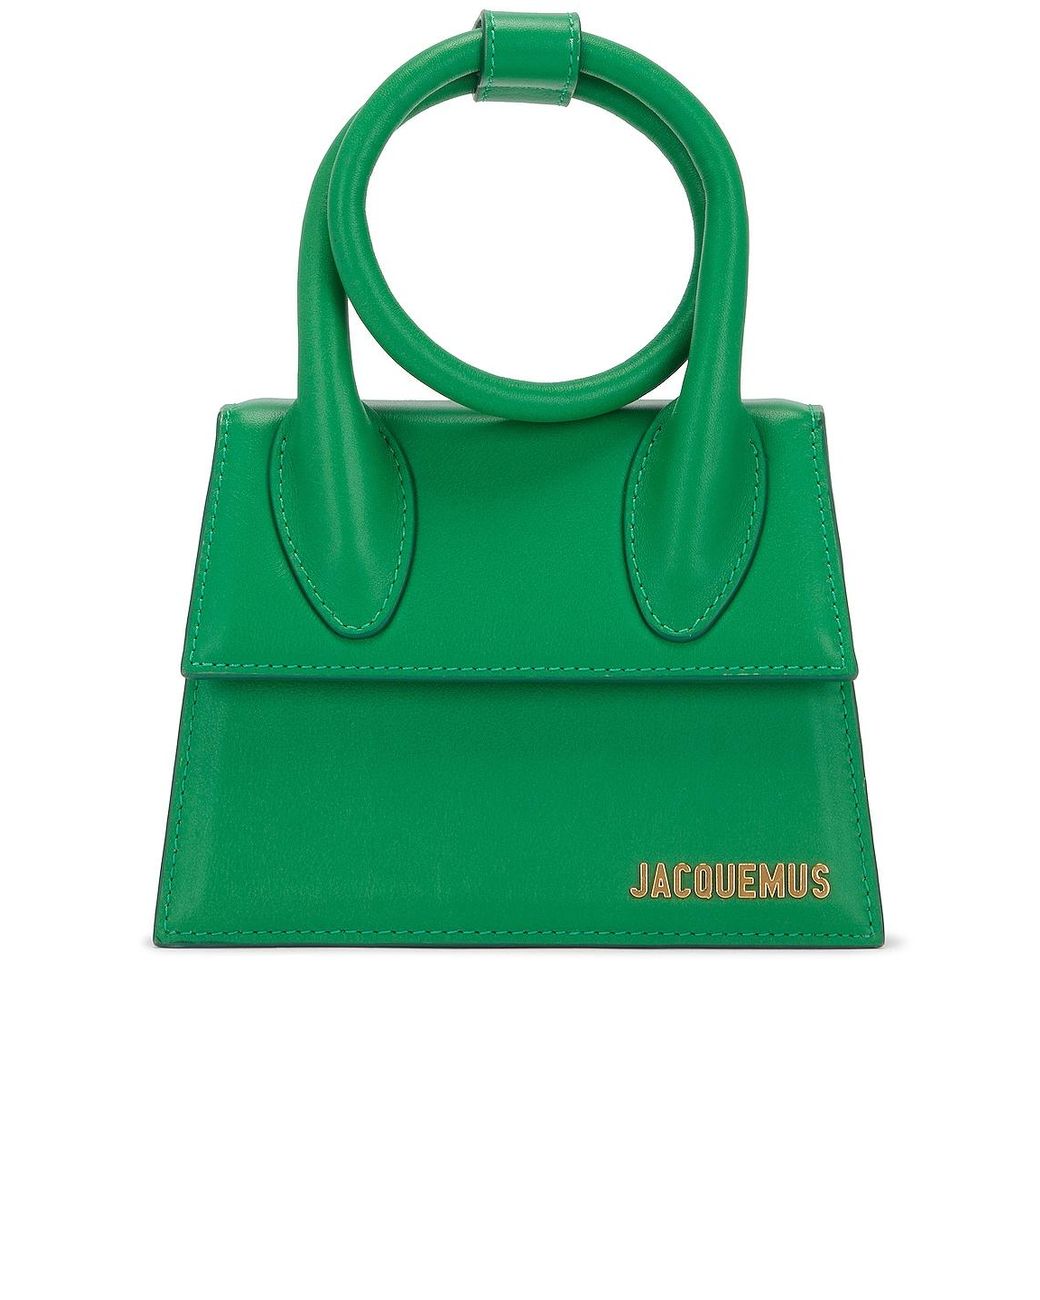 Jacquemus Le Chiquito Noeud Bag in Green | Lyst